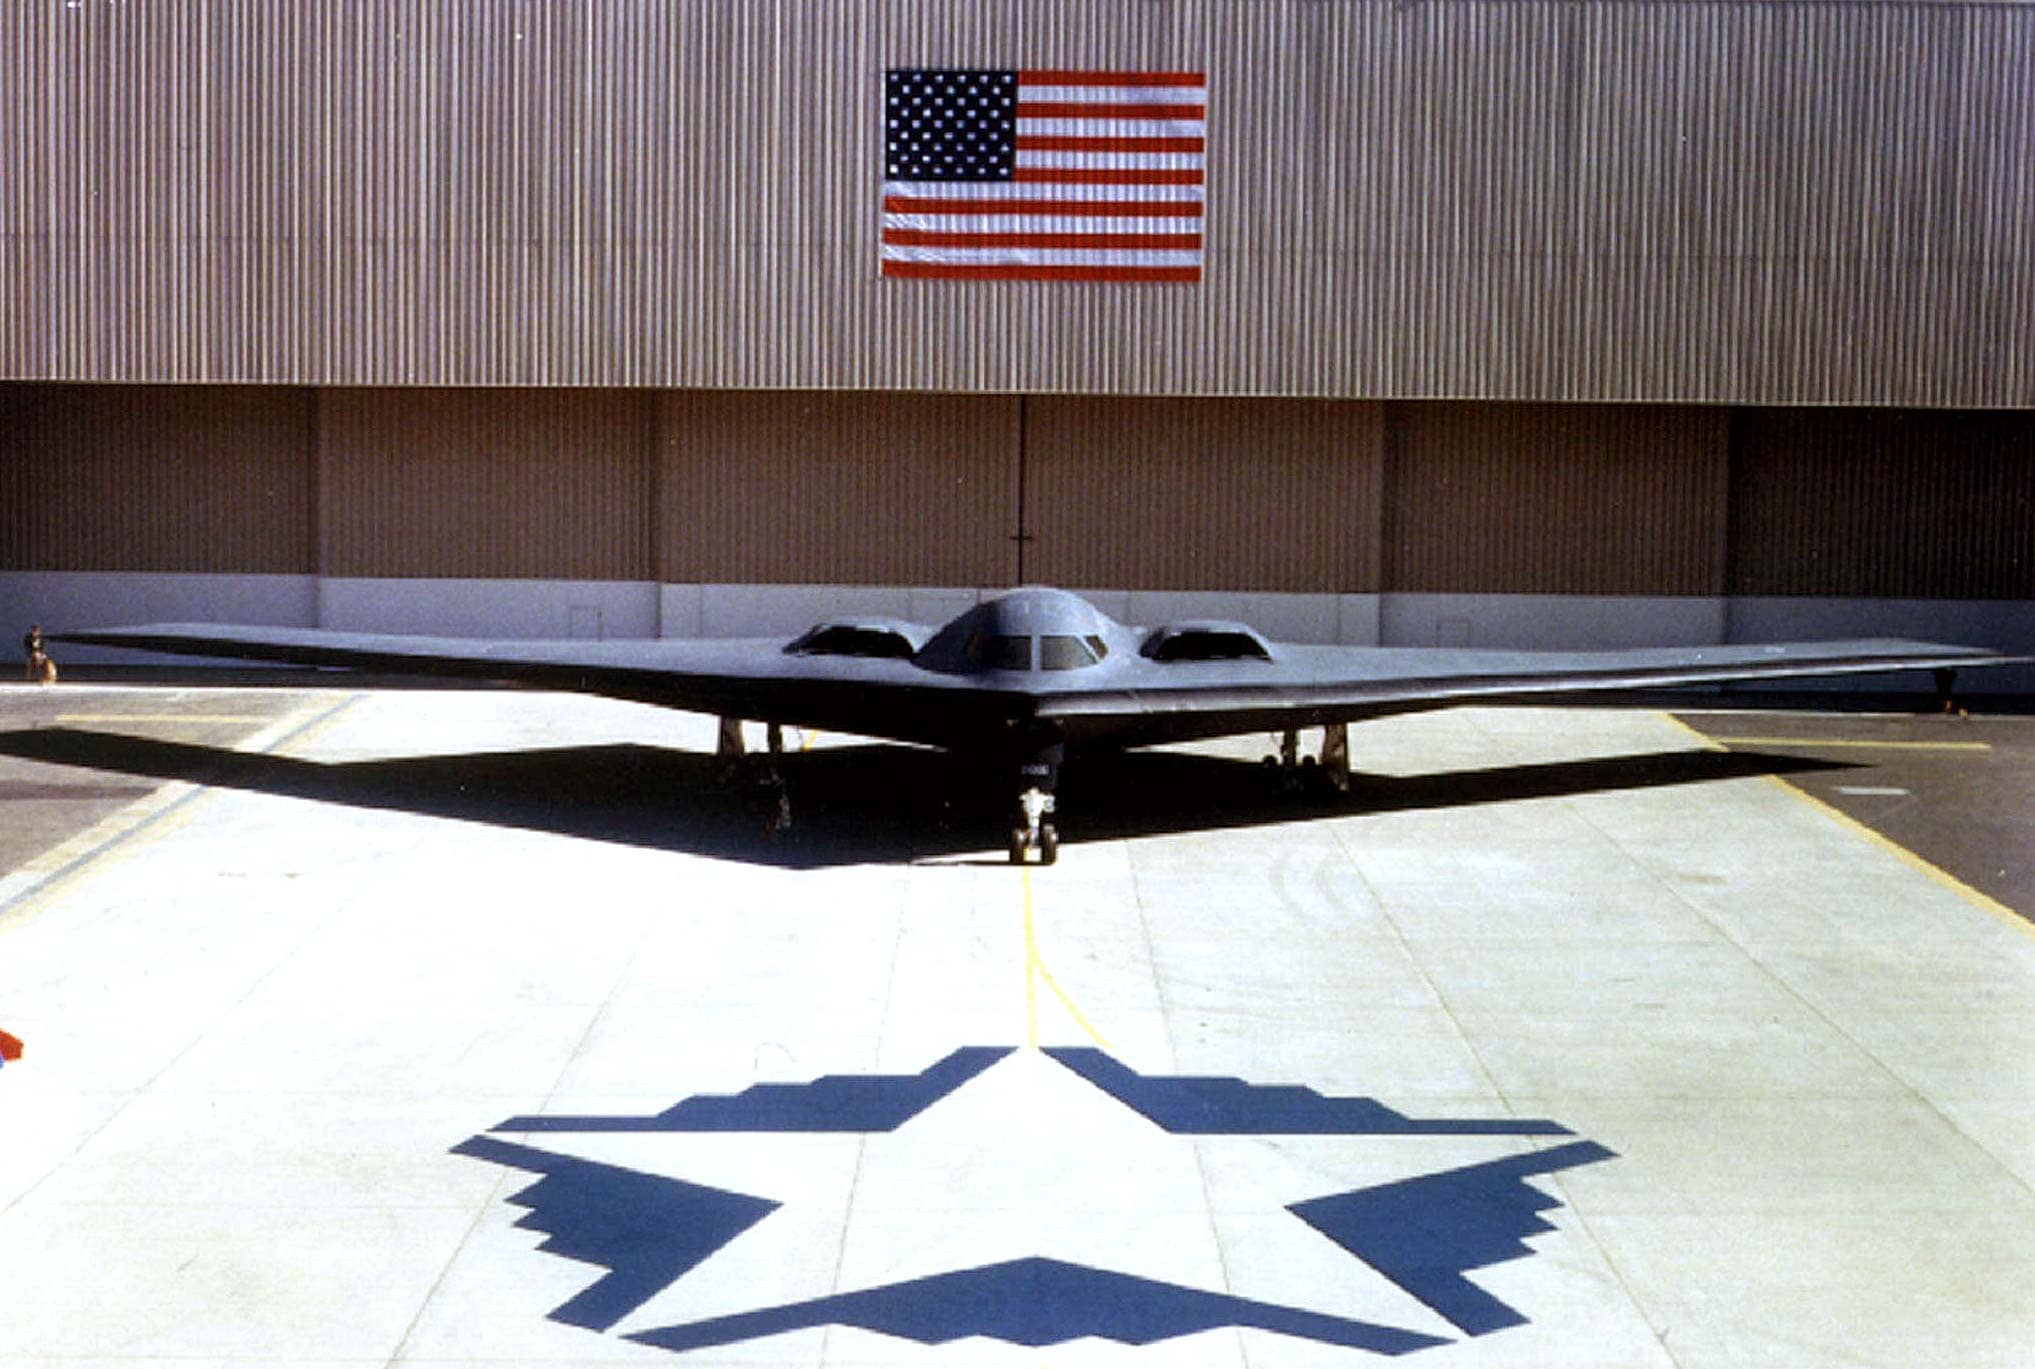 file-photo-26apr90-the-air-force-said-on-may-14-it-had-grounded-the-u-s-fleet-of-2-billion-b-2-s